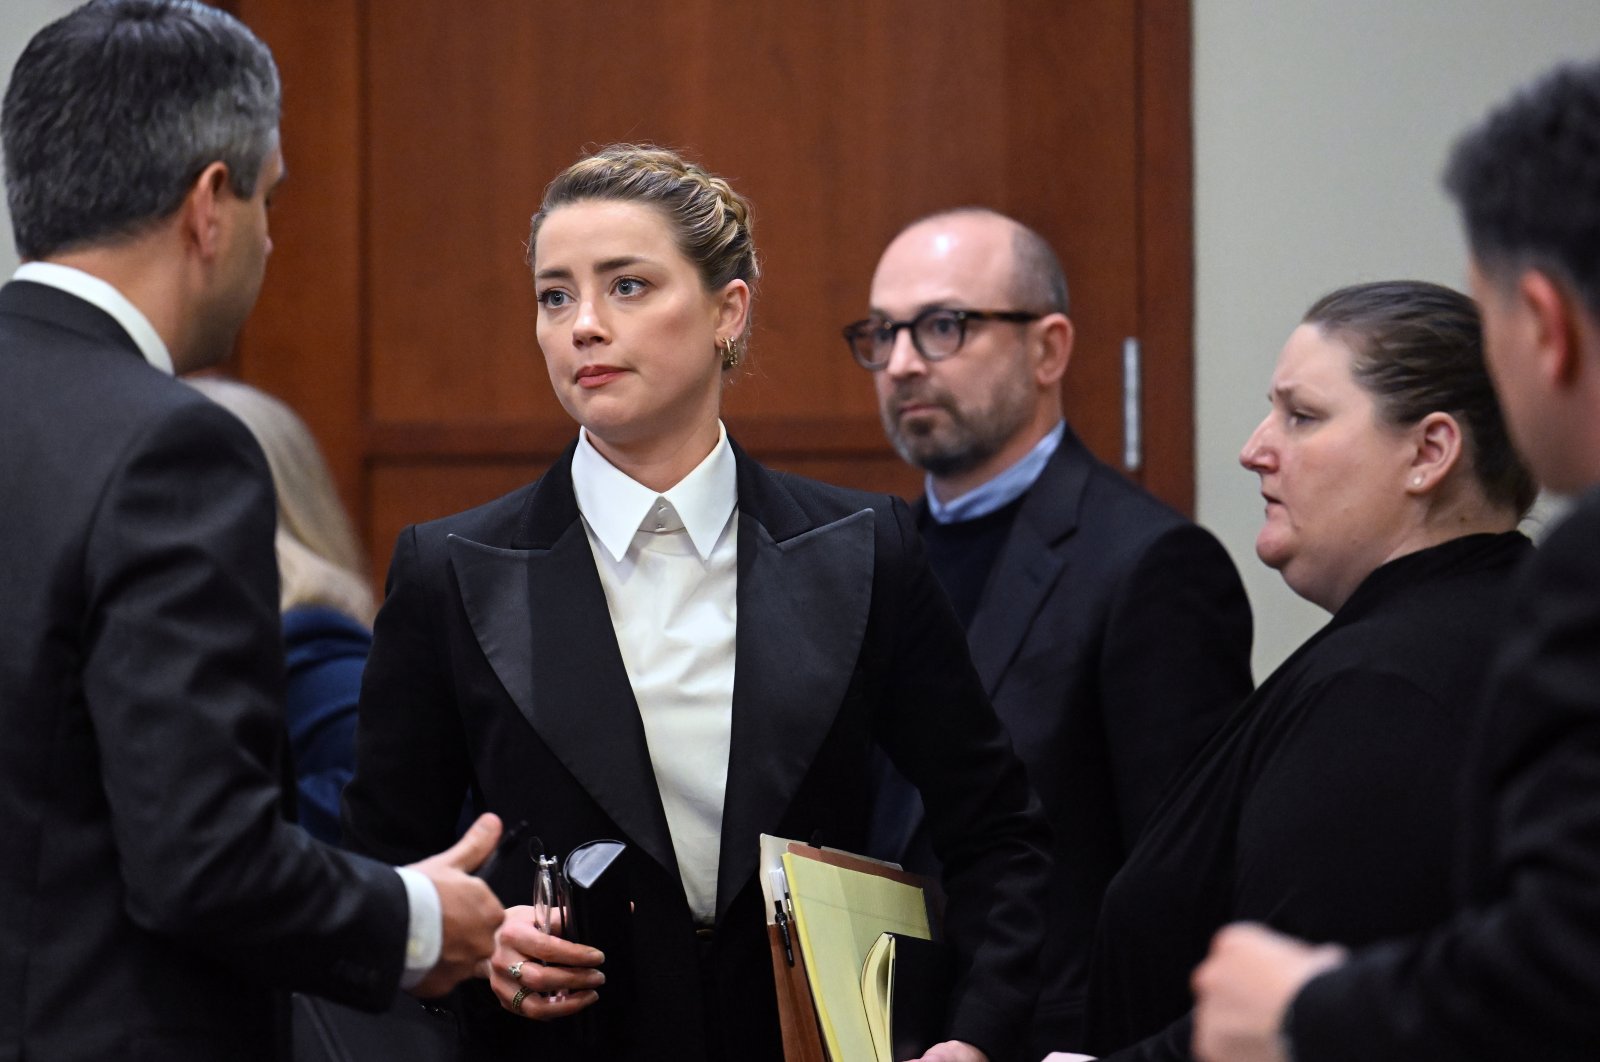 Actor Amber Heard in the courtroom at the Fairfax County Circuit Court in Fairfax, Va., Tuesday, May 3, 2022. (AP)